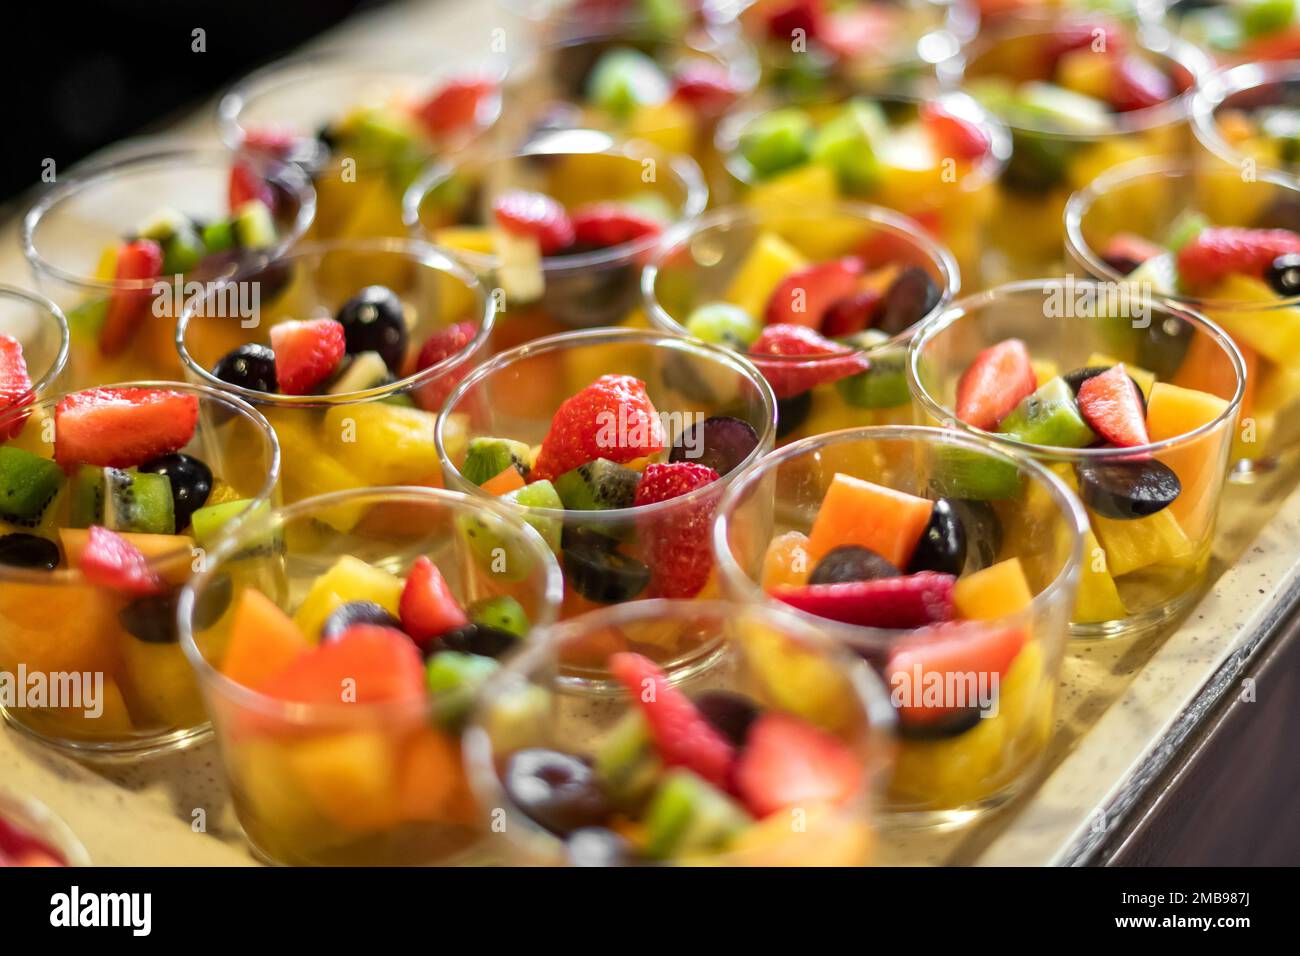 High angle of fruit salad in glass bowls consisting of sliced strawberries kiwi mangoes and grapes Stock Photo